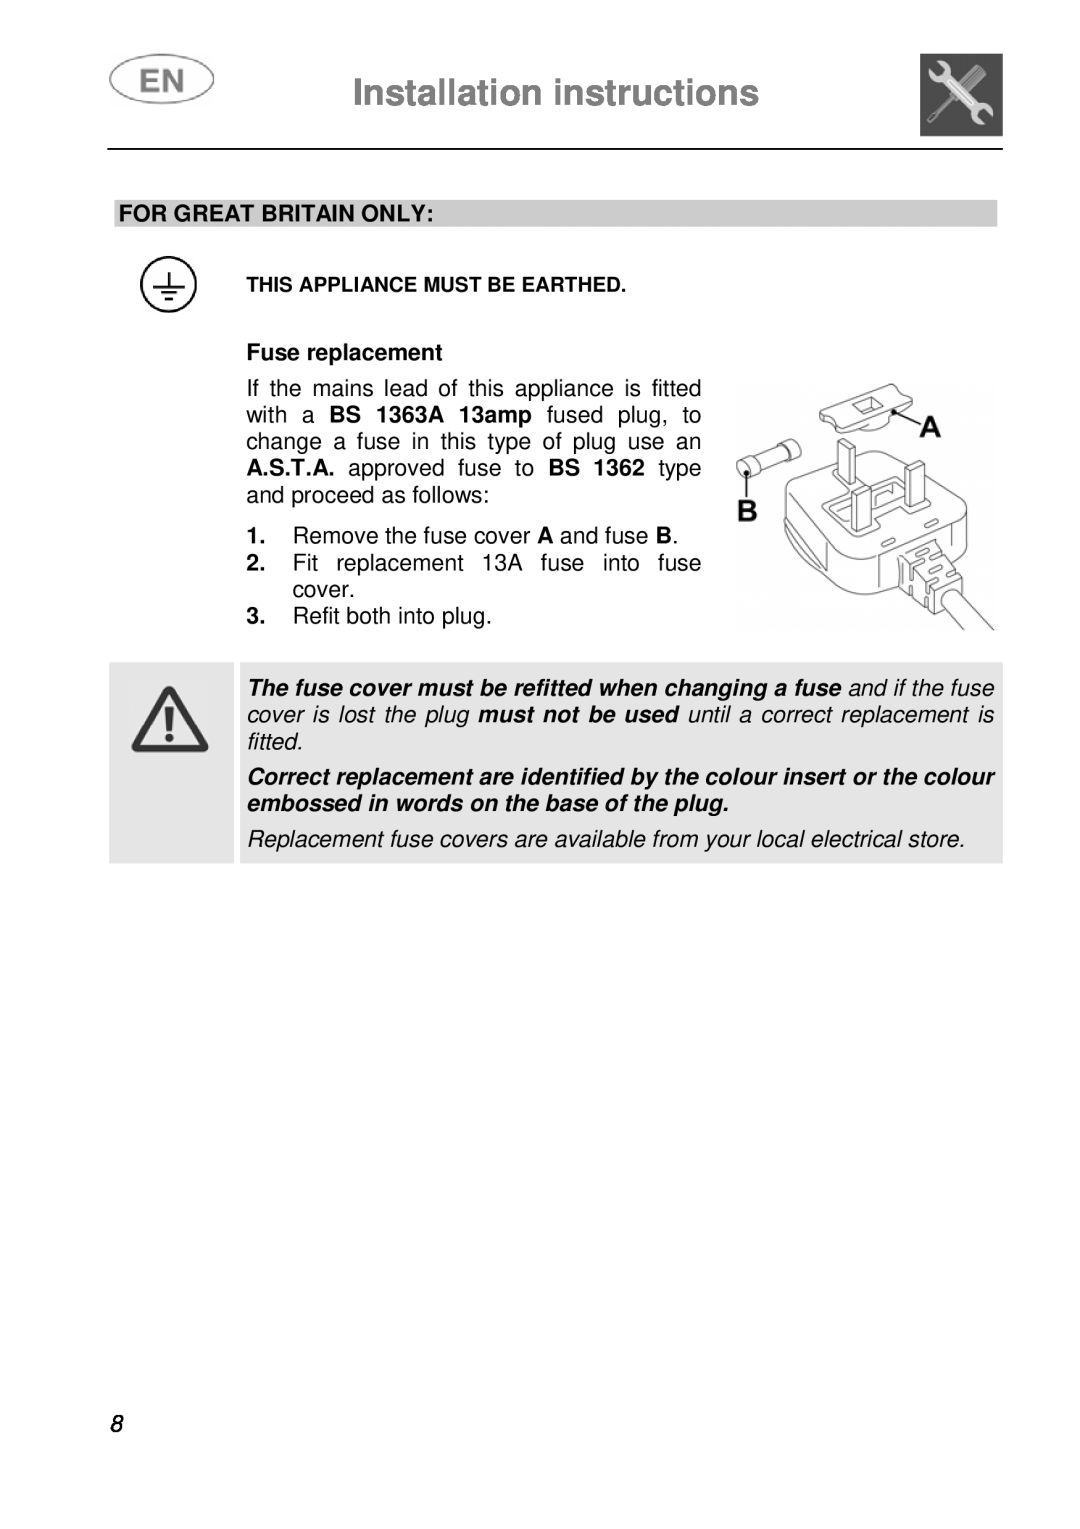 Smeg LSA643XPQ instruction manual Installation instructions, For Great Britain Only, Fuse replacement 